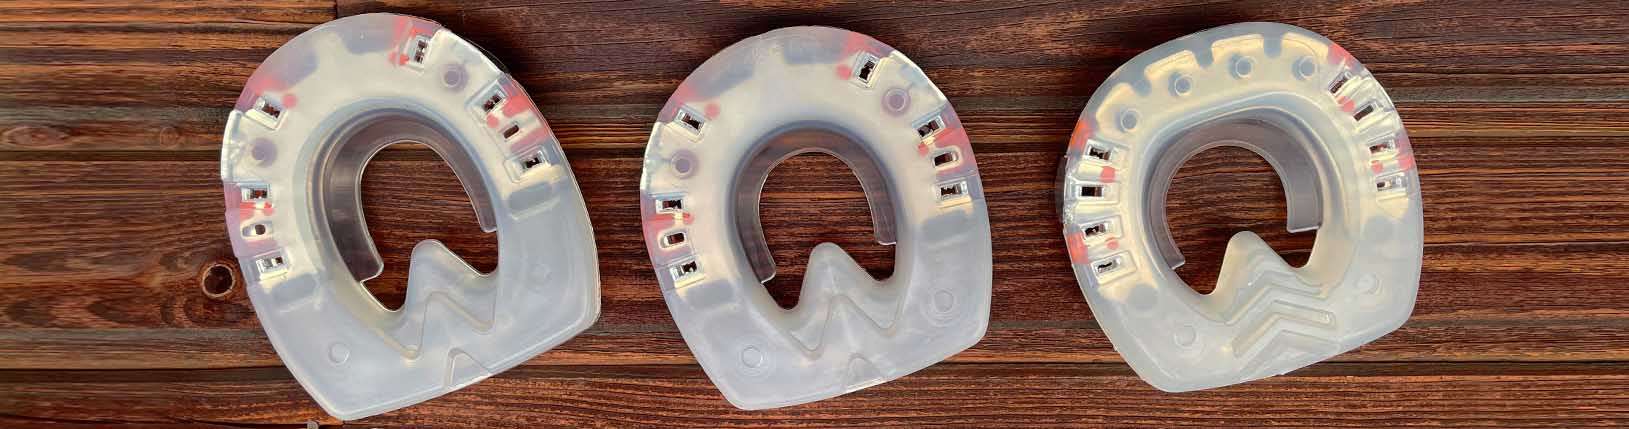 three different shapes of urethane horseshoes – round, oval and straight toe shape